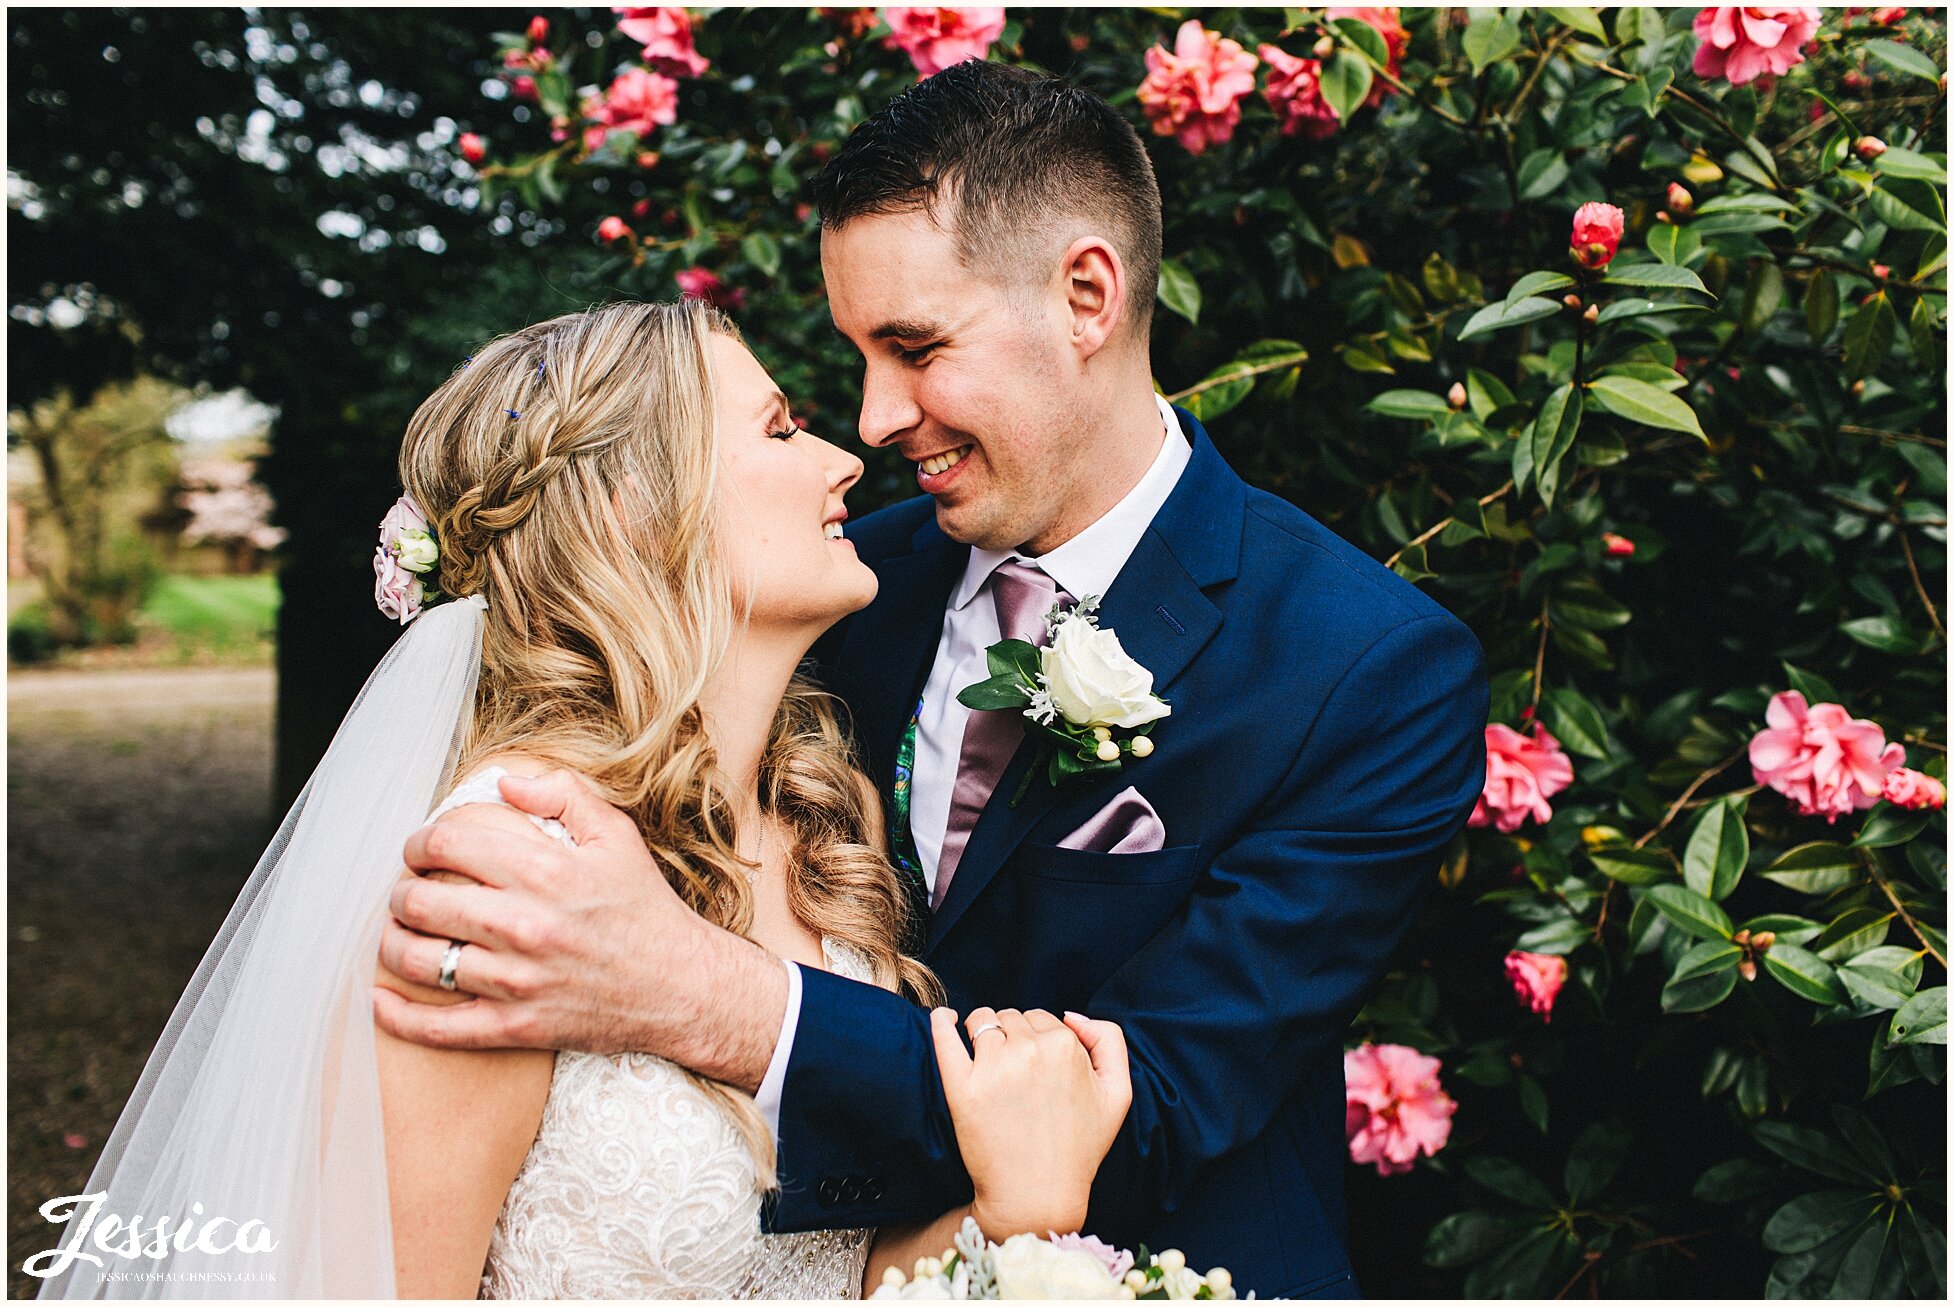 newly wed's hold each other amongst pink flowers at spring wedding